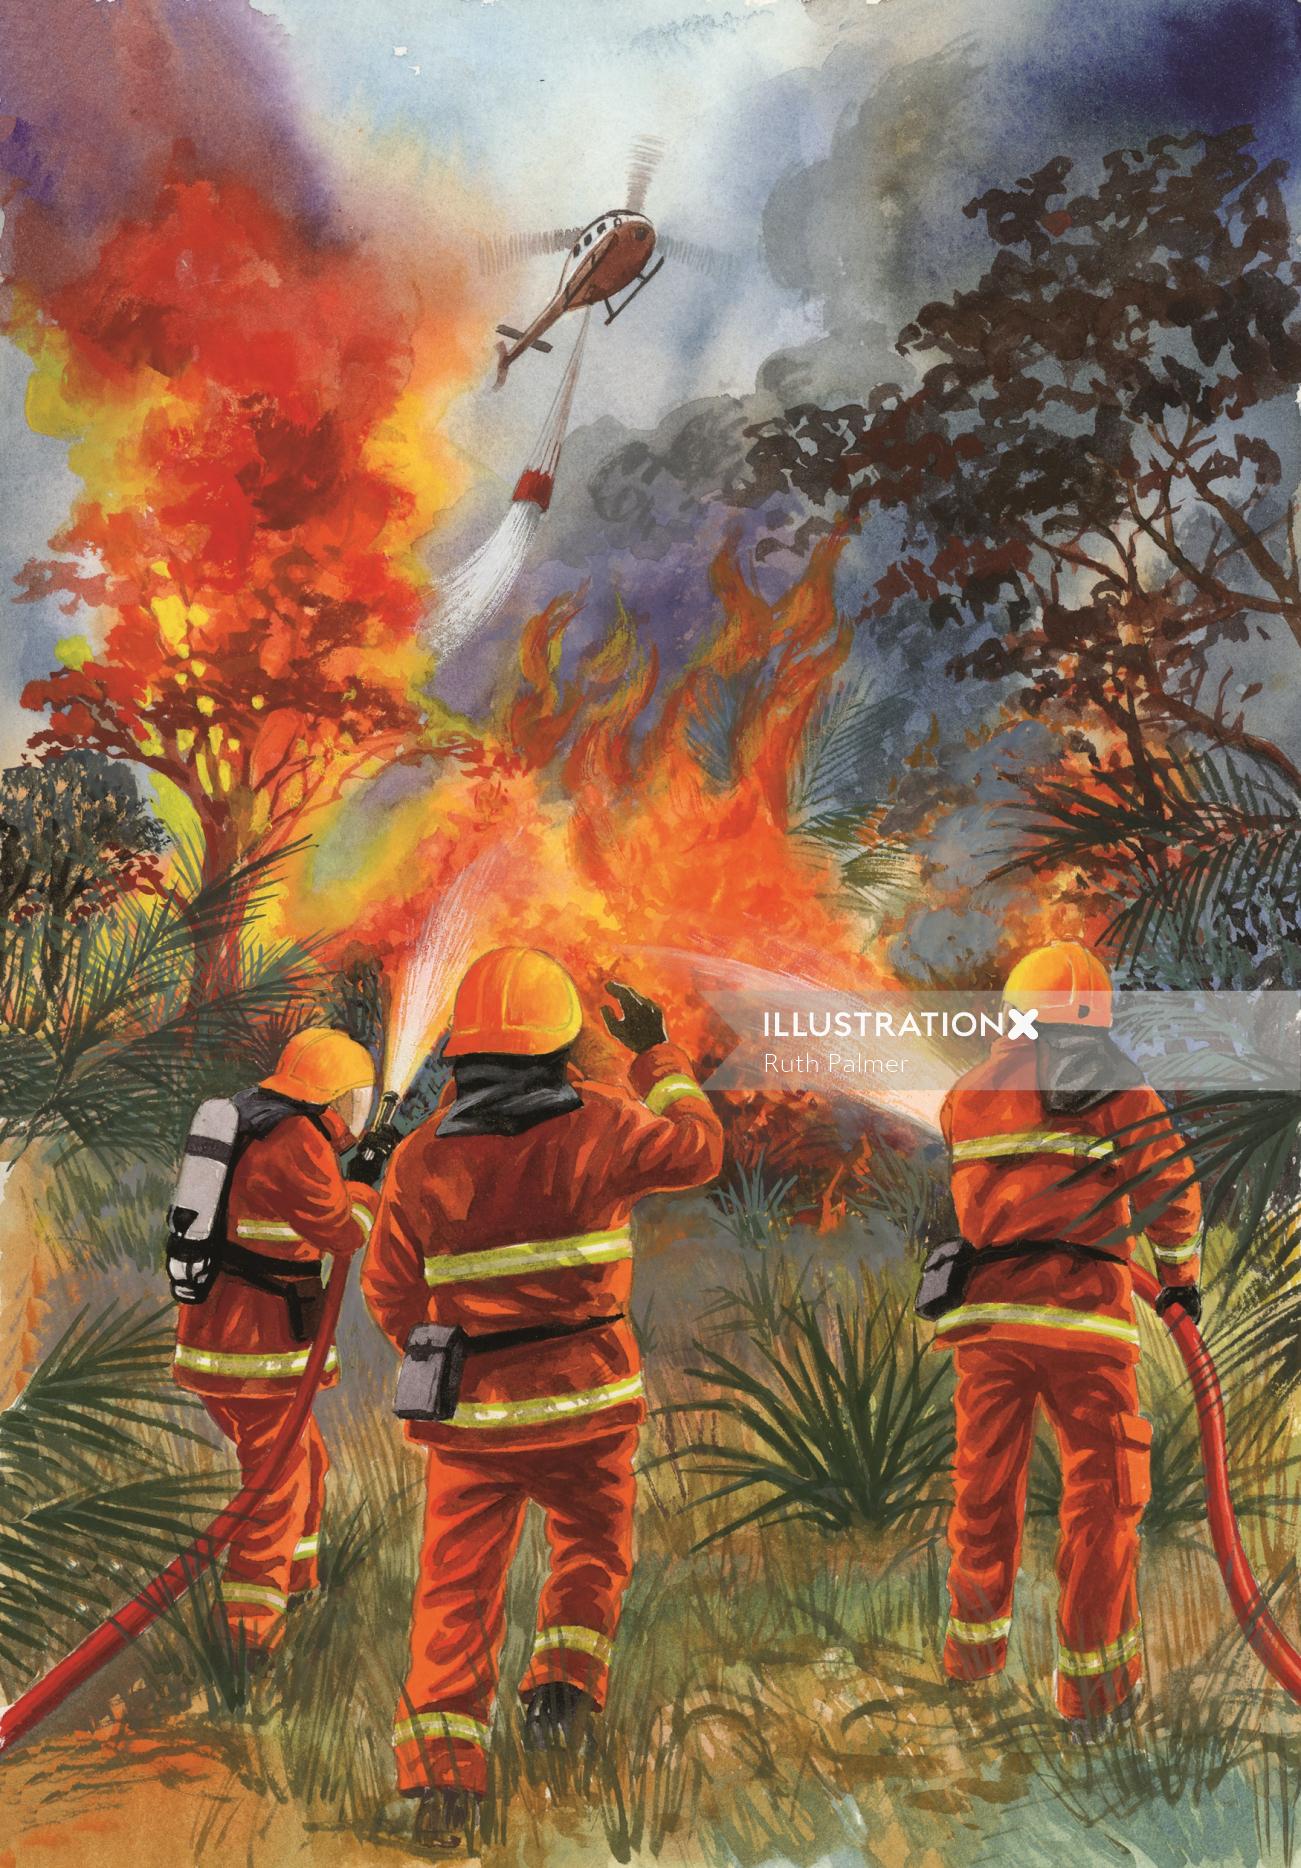 Firefighters extinguish a forest fire poster